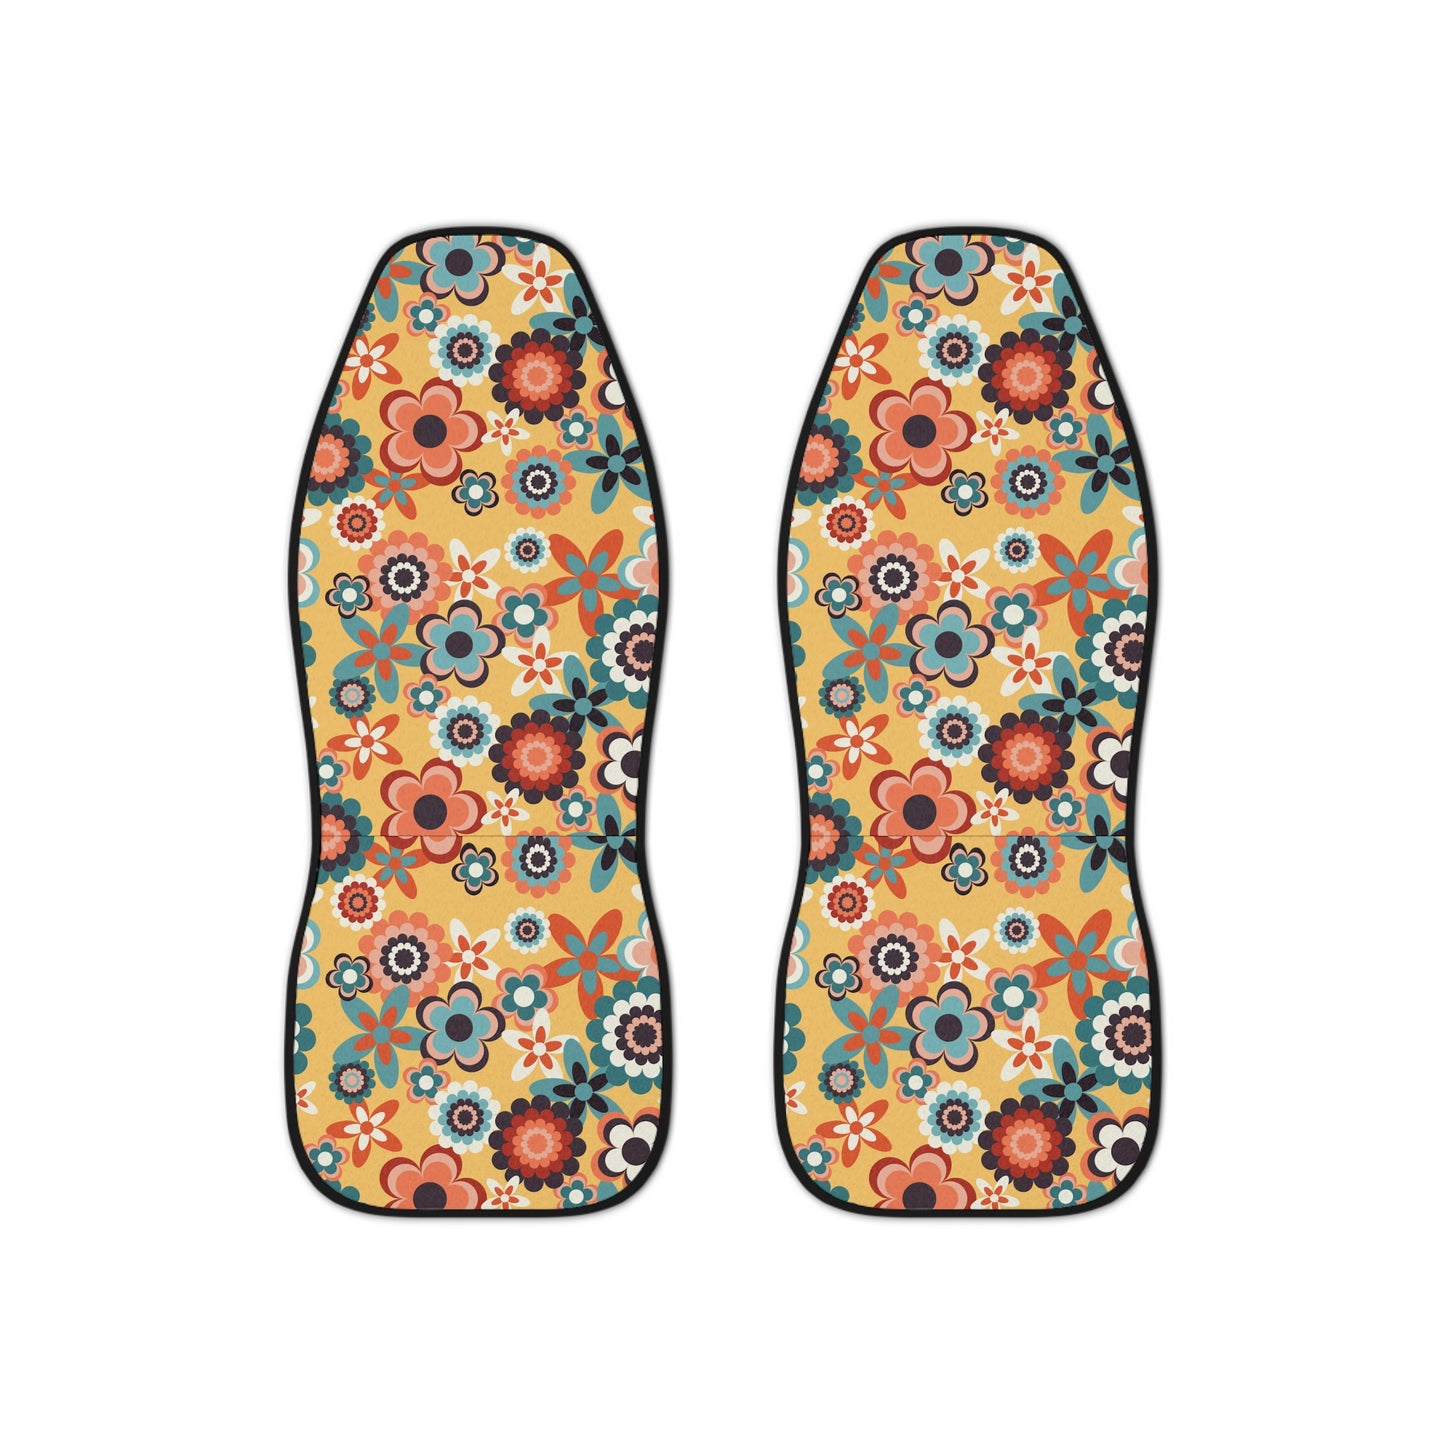 Retro 60s 70s Groovy Flowers Boho Mid Century Mod Yellow, Coral & Blue Car Seat Covers